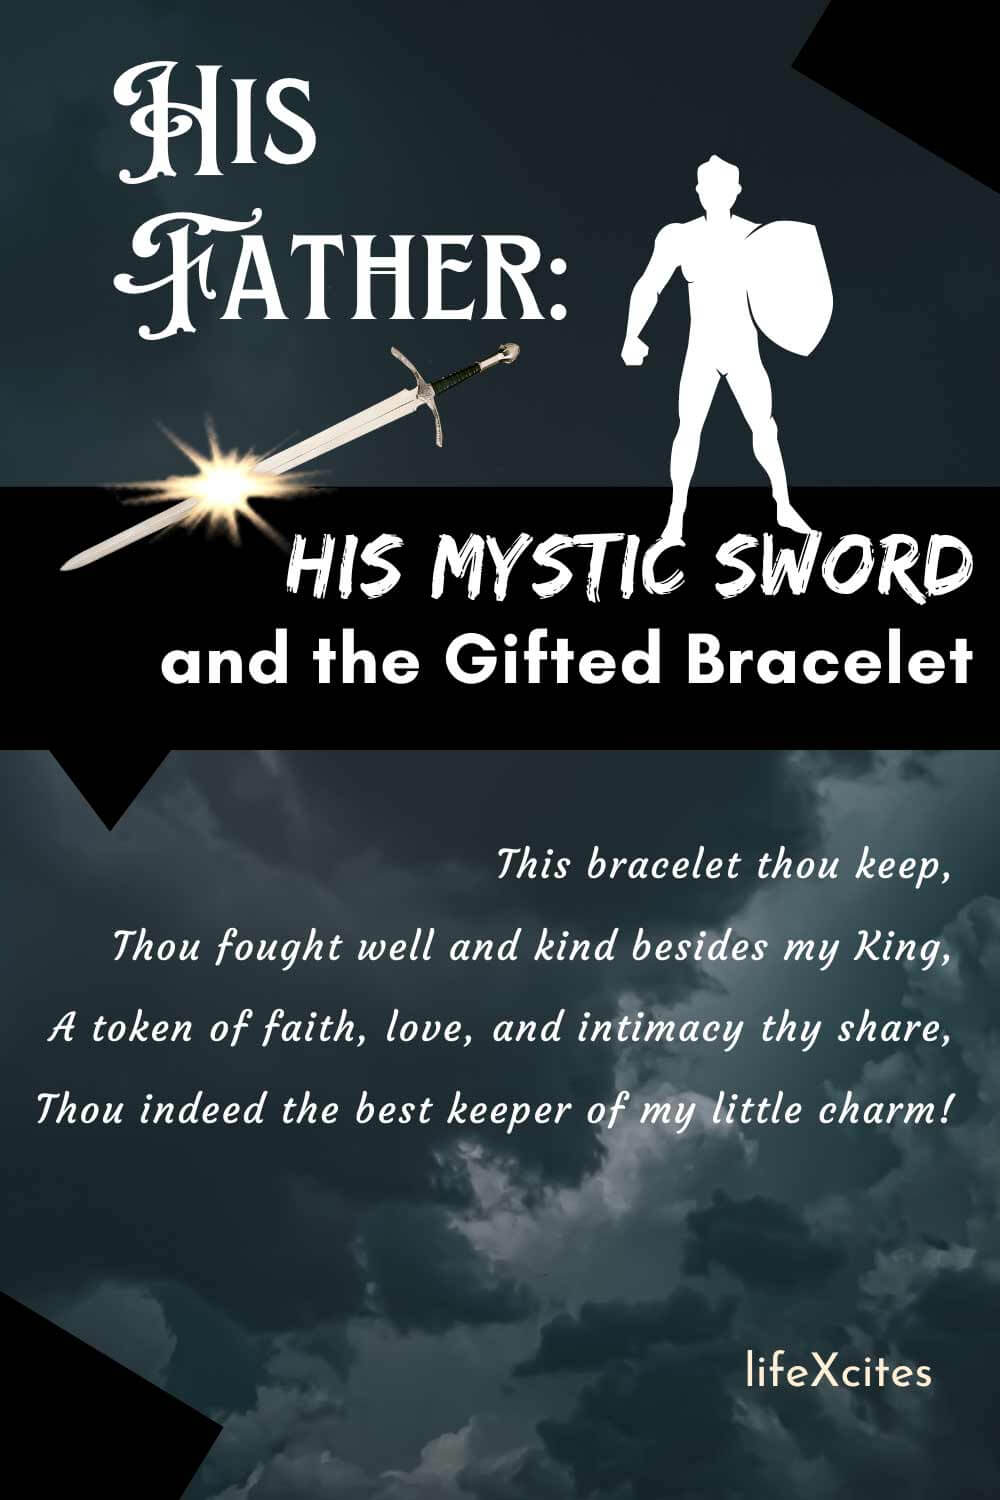 sad poem - His Mystic Sword and the Gifted Bracelet